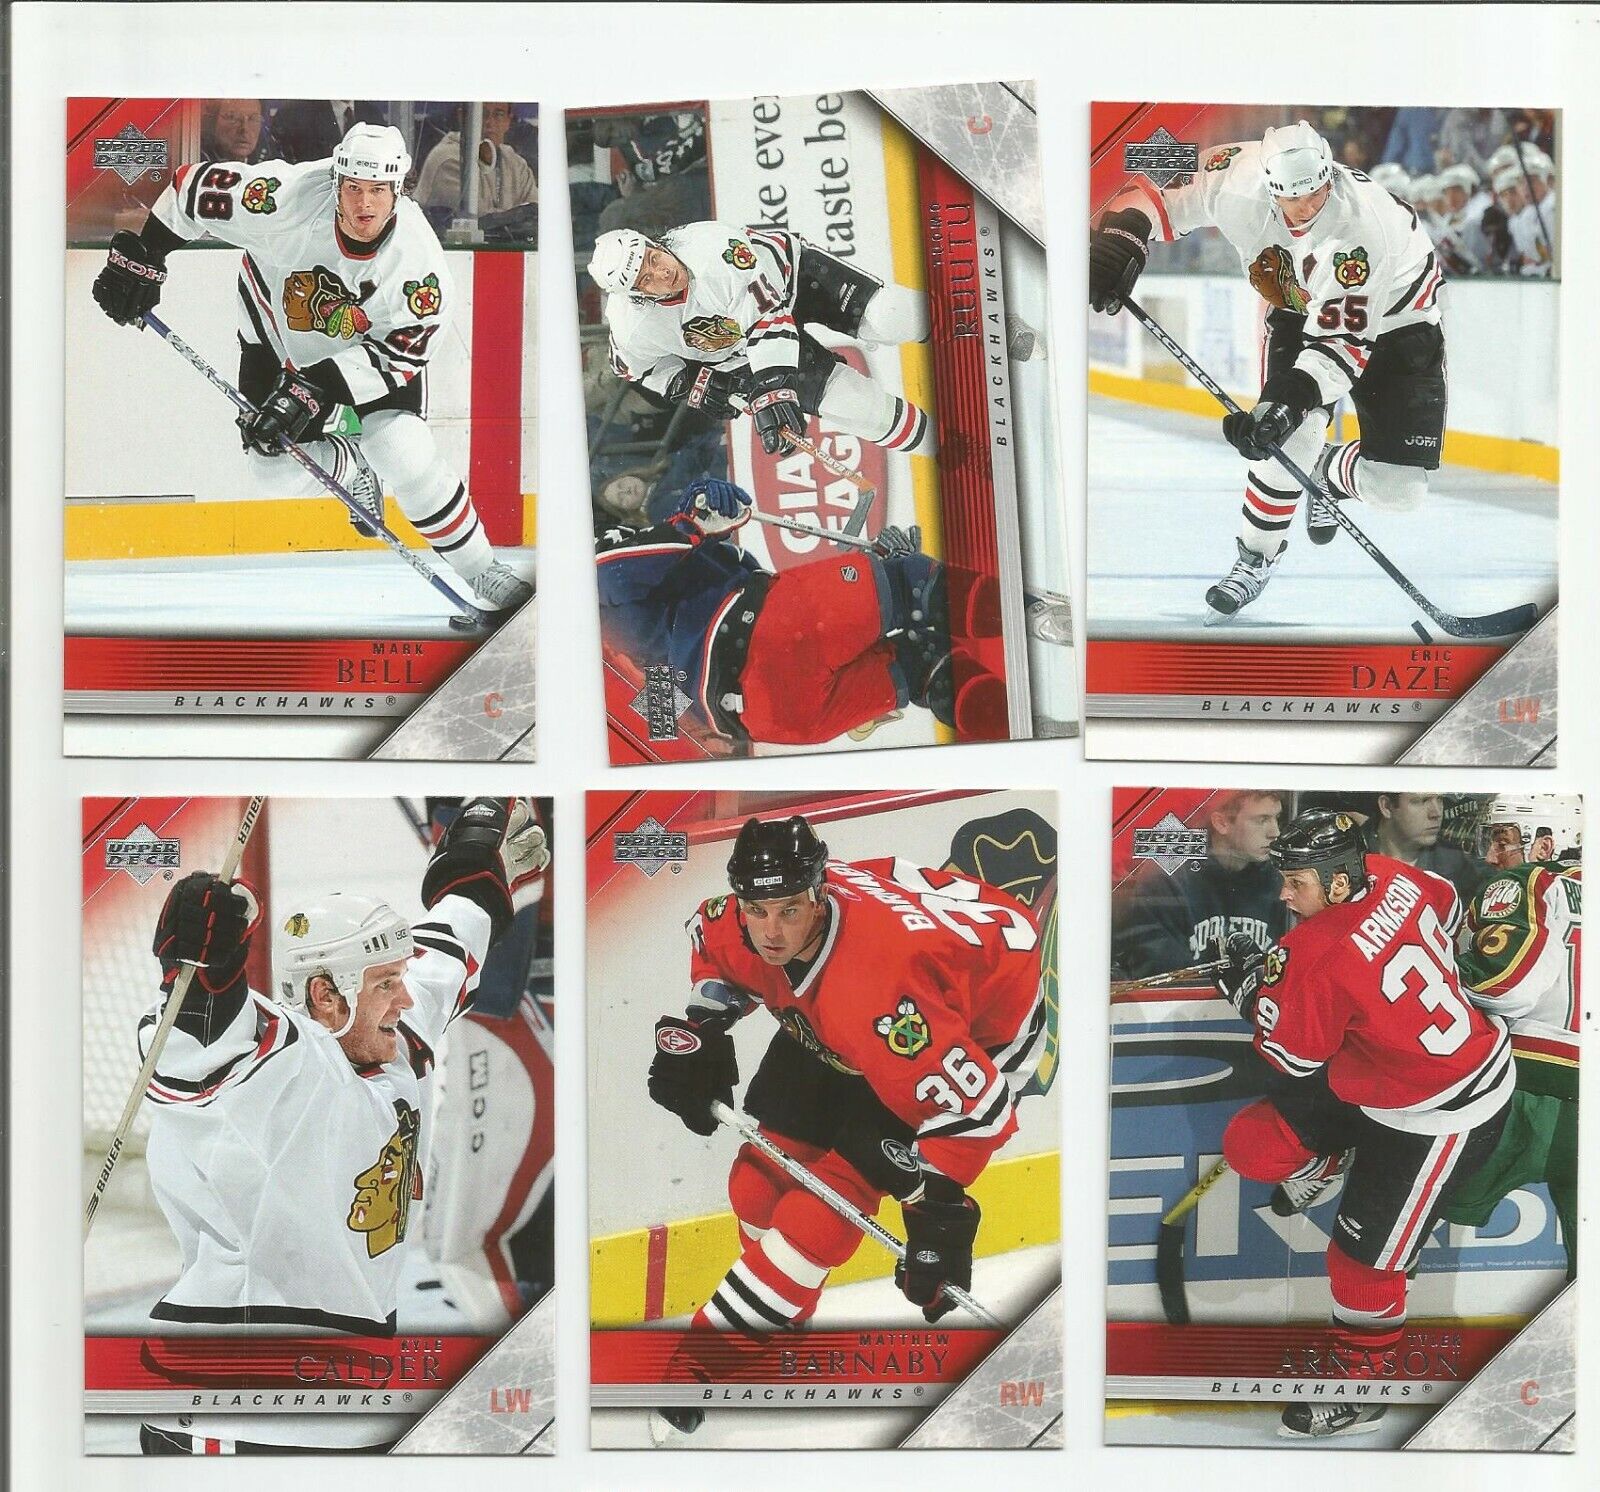 2005 UD SRS 1 CHICAGO BLACK HAWKS Select from LIST HOCKEY CARDS UPPER DECK 05-06